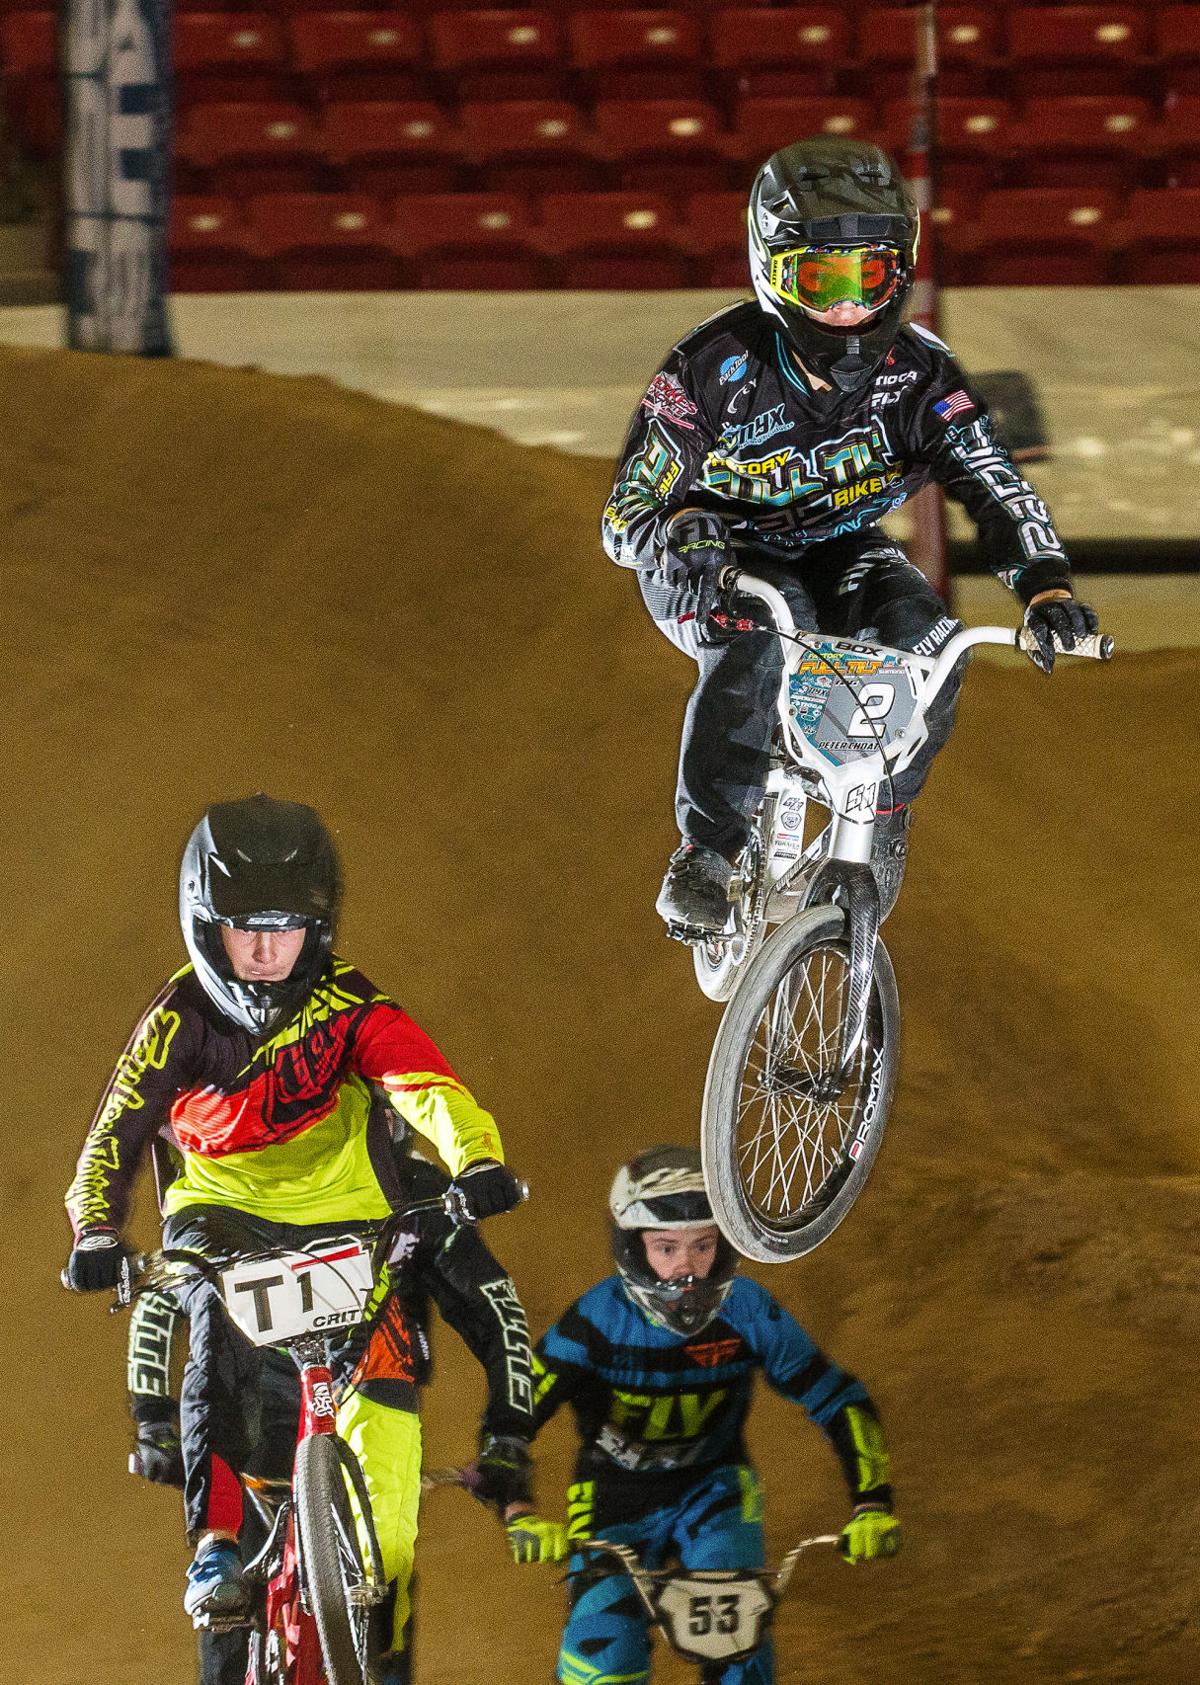 USA BMX Golden State Nationals returns to Bakersfield this weekend ...